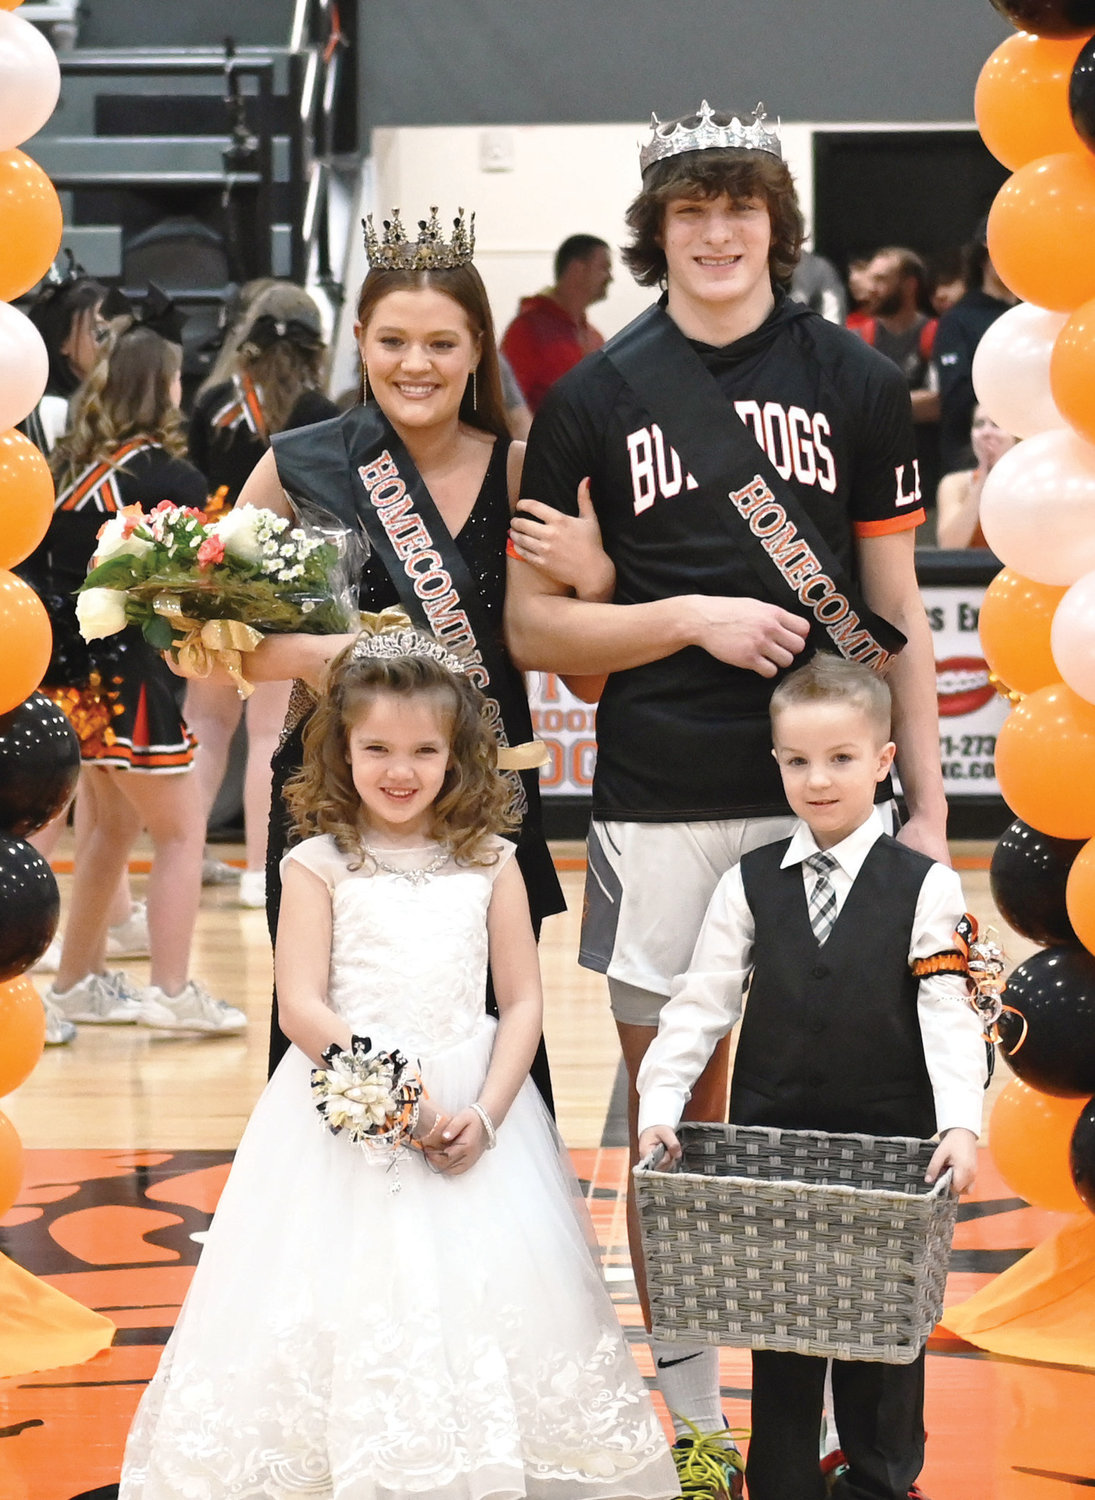 Homecoming Queen Rylee Beason locks arms with King Trey Hartzog. Also pictured are flower girl Noelanie Rollins and crown bearer Stryker Olson.